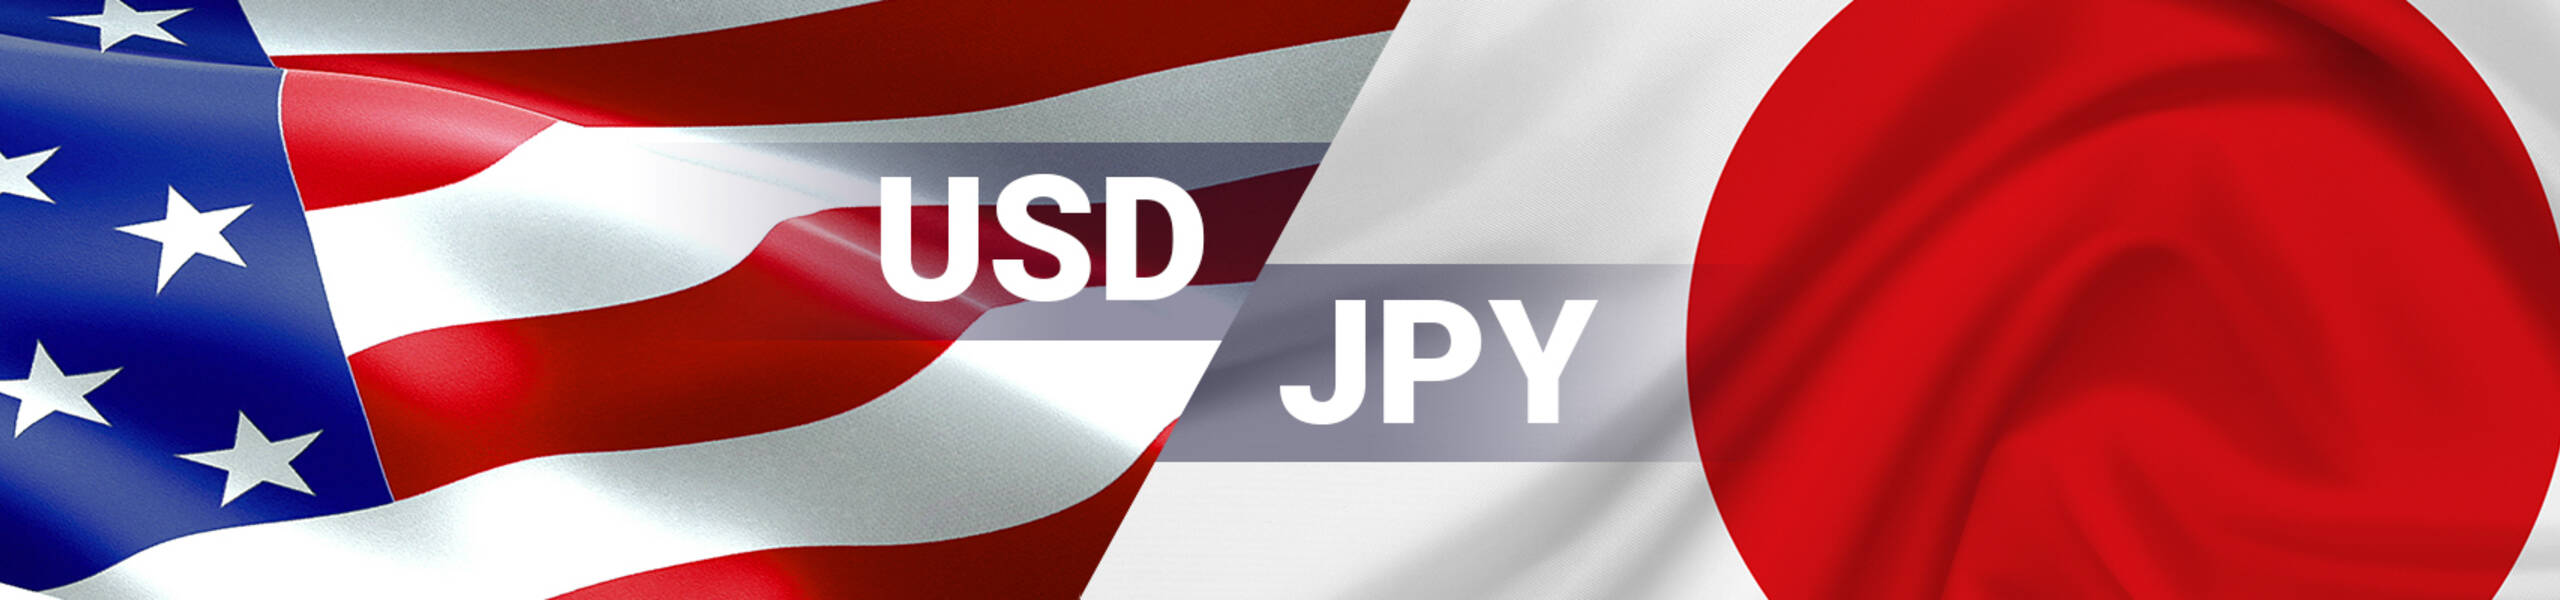 USD/JPY: dollar is overbought